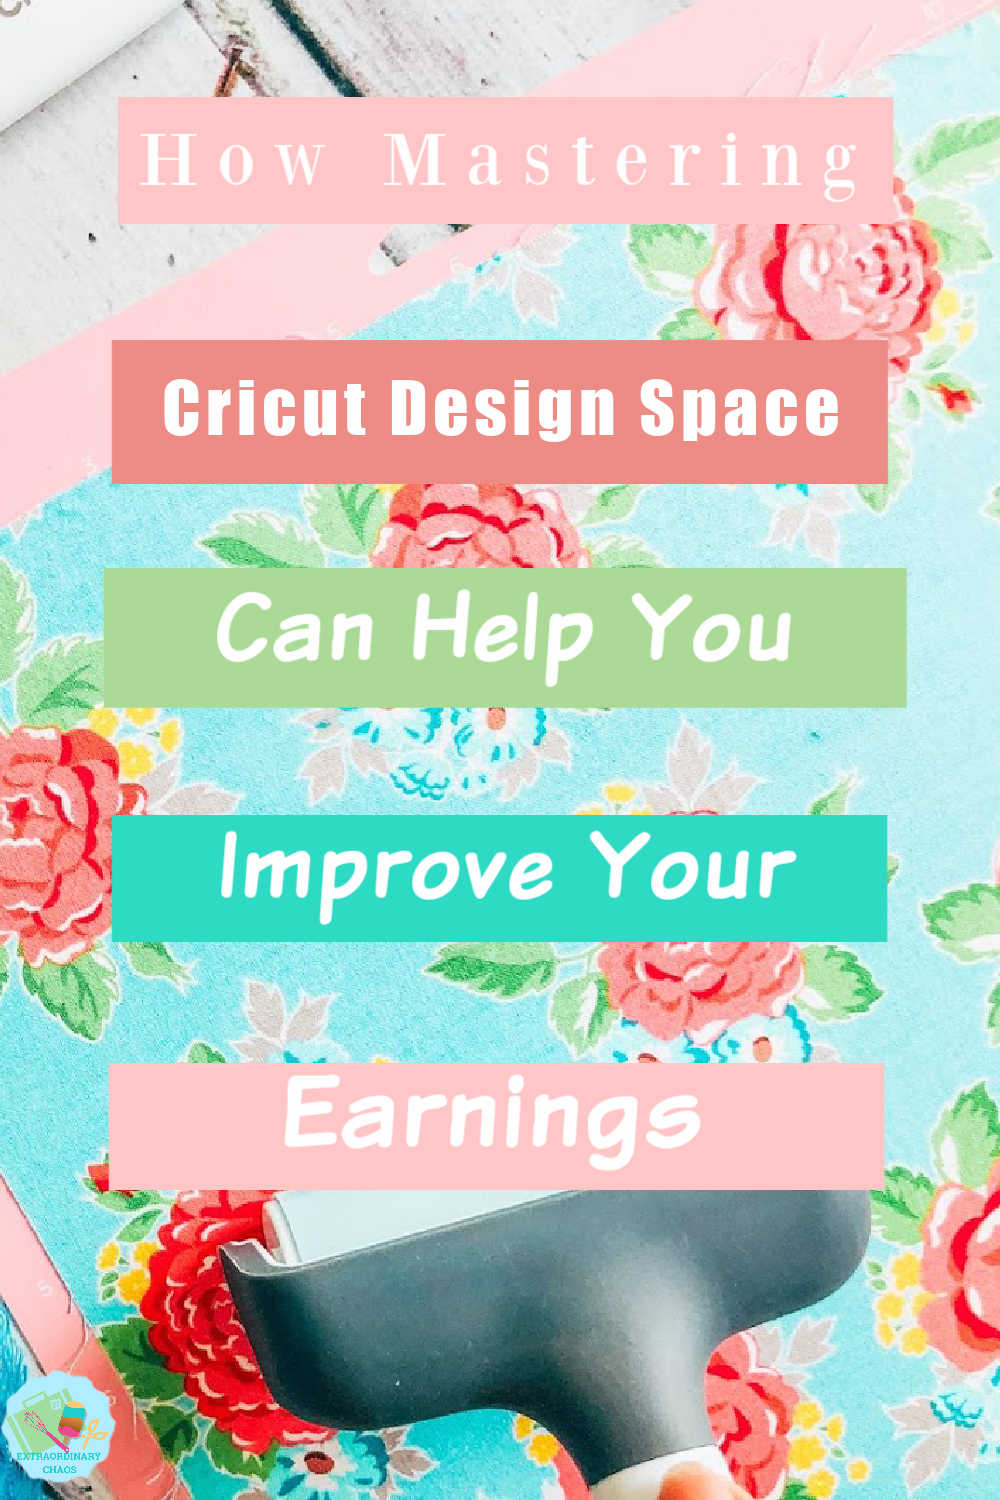 How mastering Cricut Design Space Can Help You Improve Your Earnings From Your Craft Business